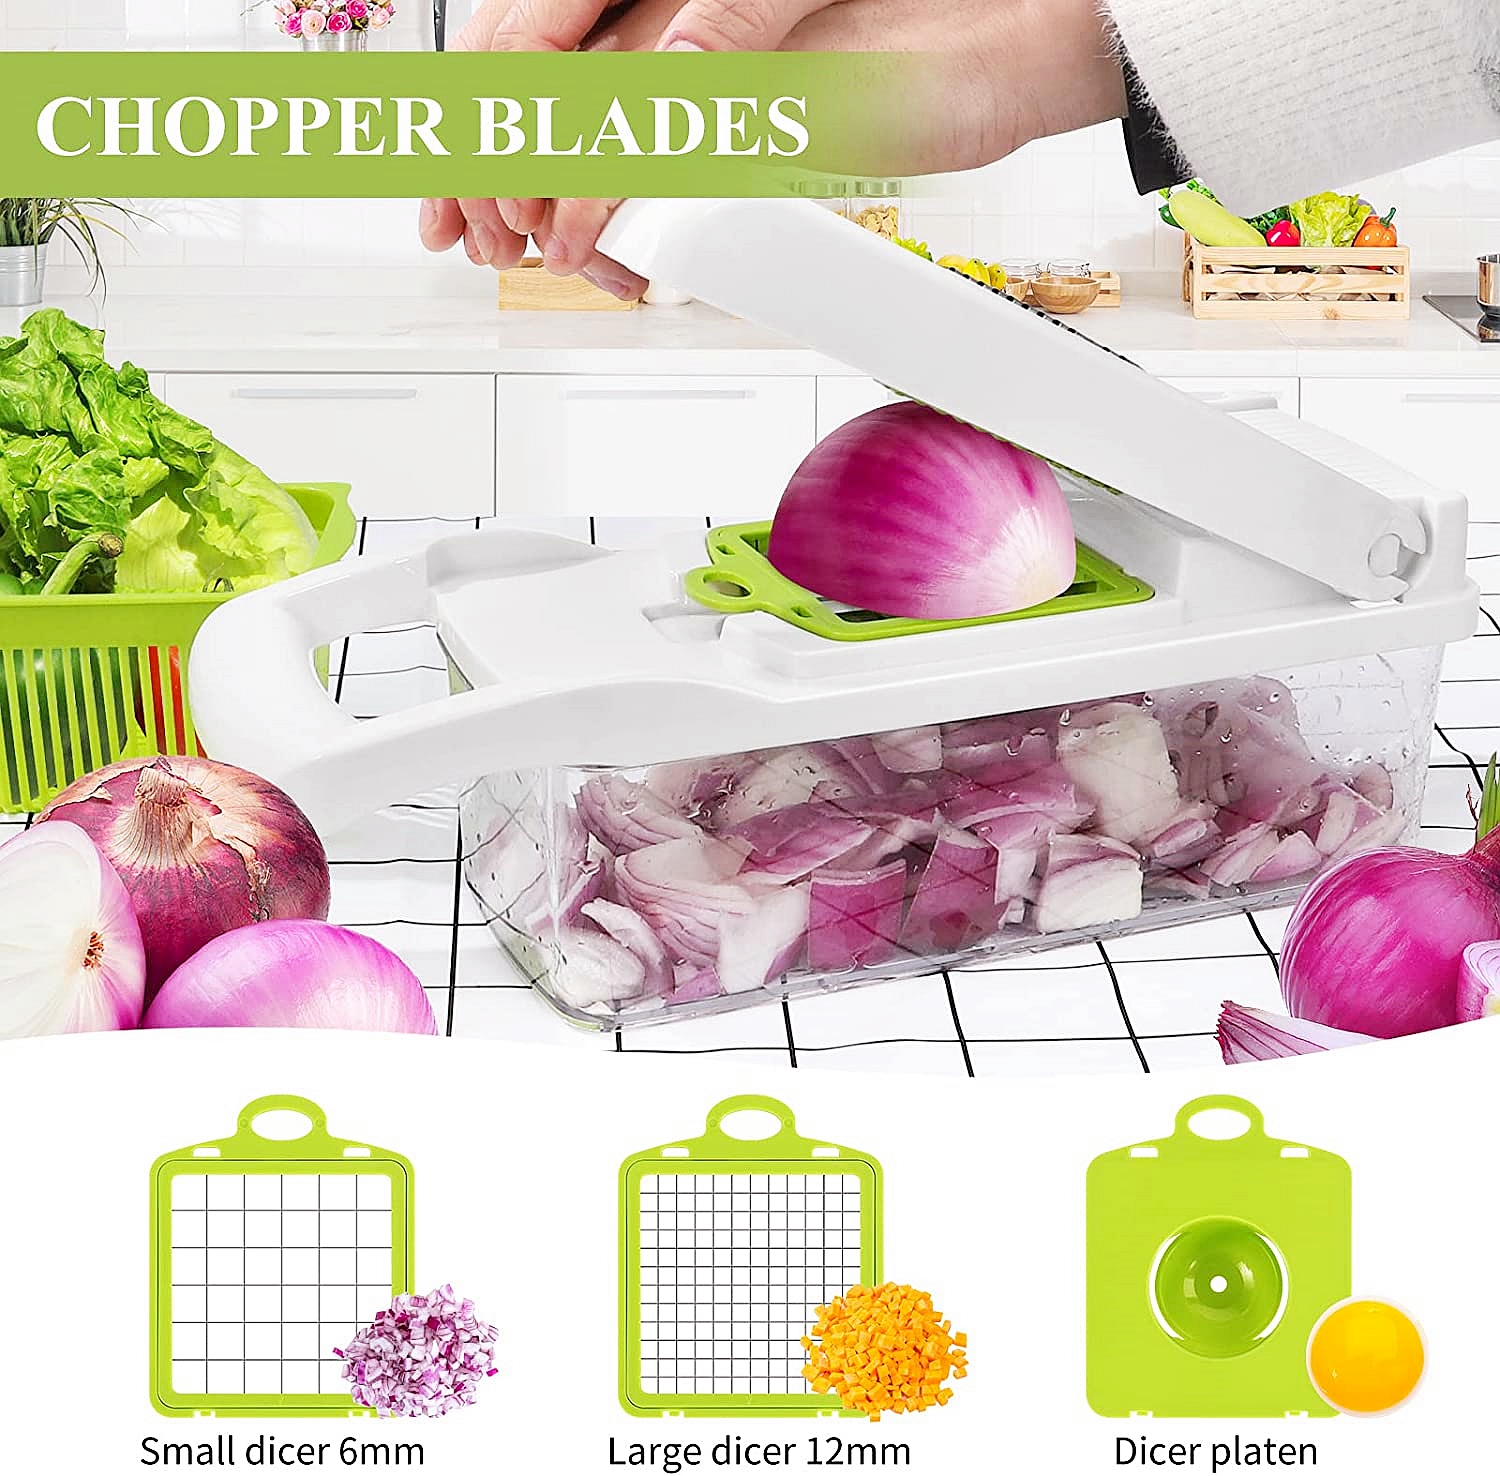 CofeLife 12 in Pro Vegetable Chopper, Multi-functional Onion Chopper, Vegetable  Cutter Stainless Steel Blades, Vegetable Slicer Container, Mandoline Slicer,  Dicer, Cutter Ideal for Fruits/Salads